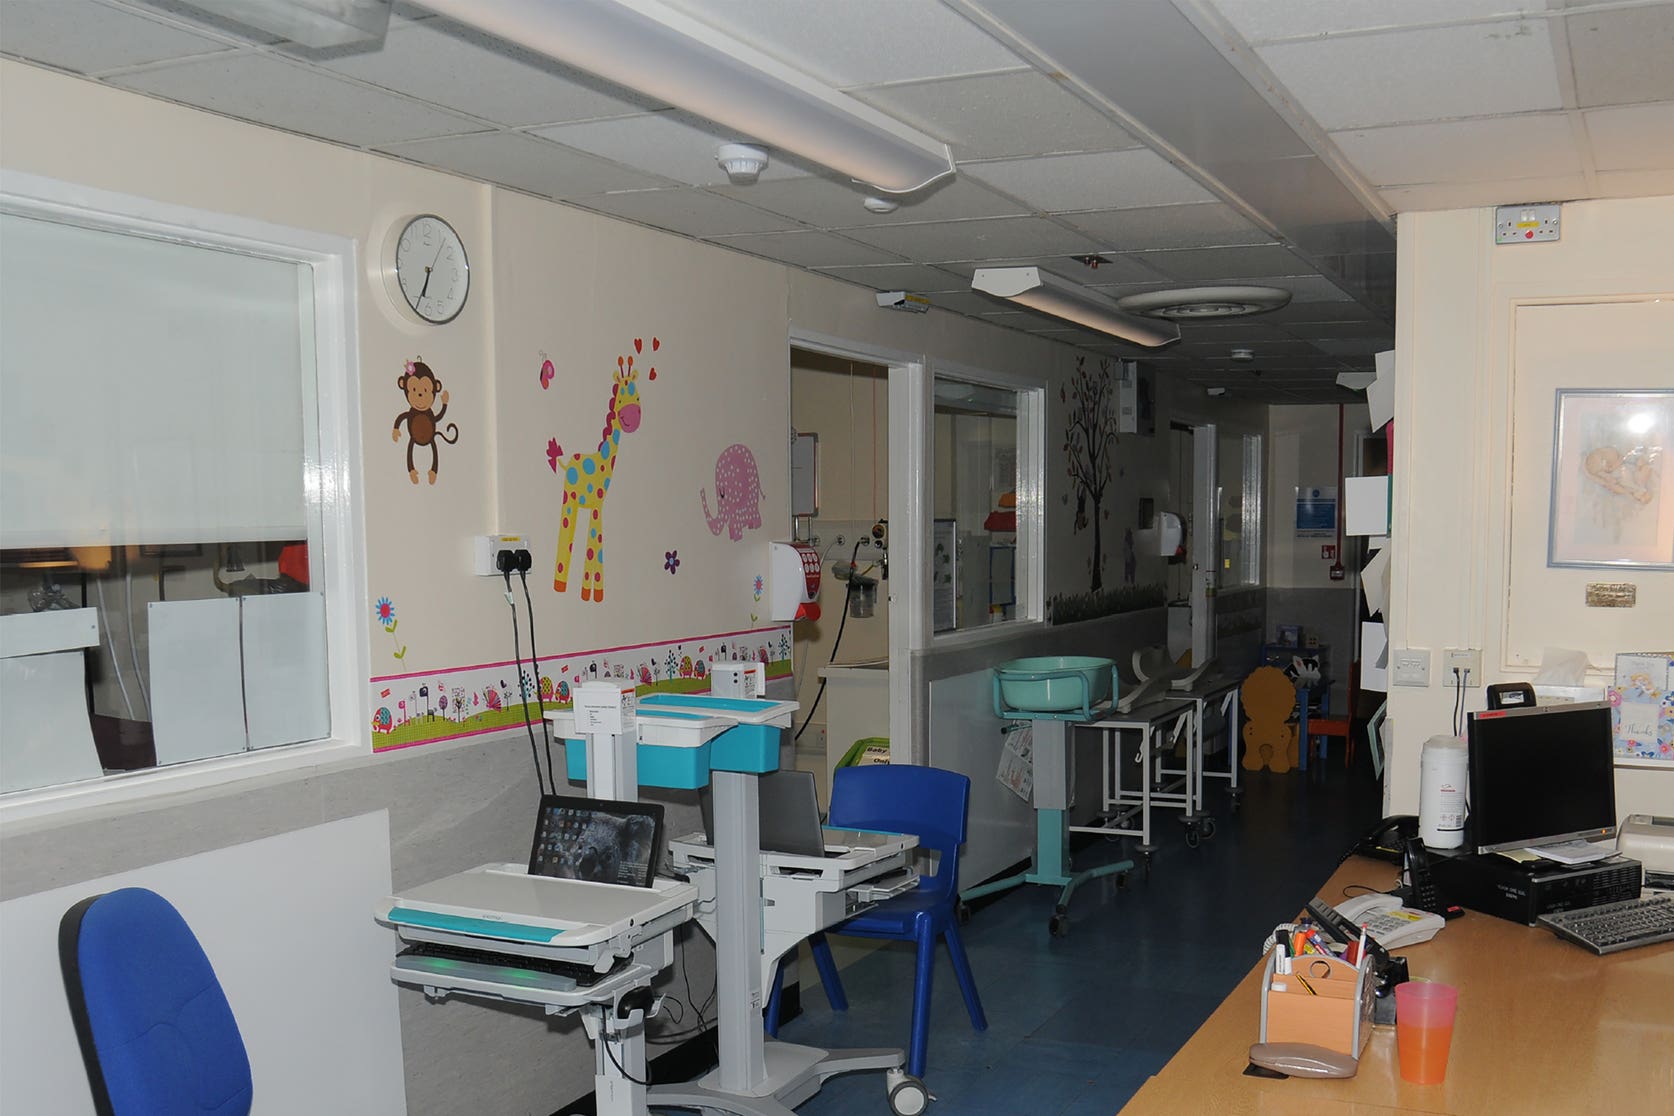 Letby operated in ‘plain sight’ on the neonatal unit at the Countess of Chester Hospital